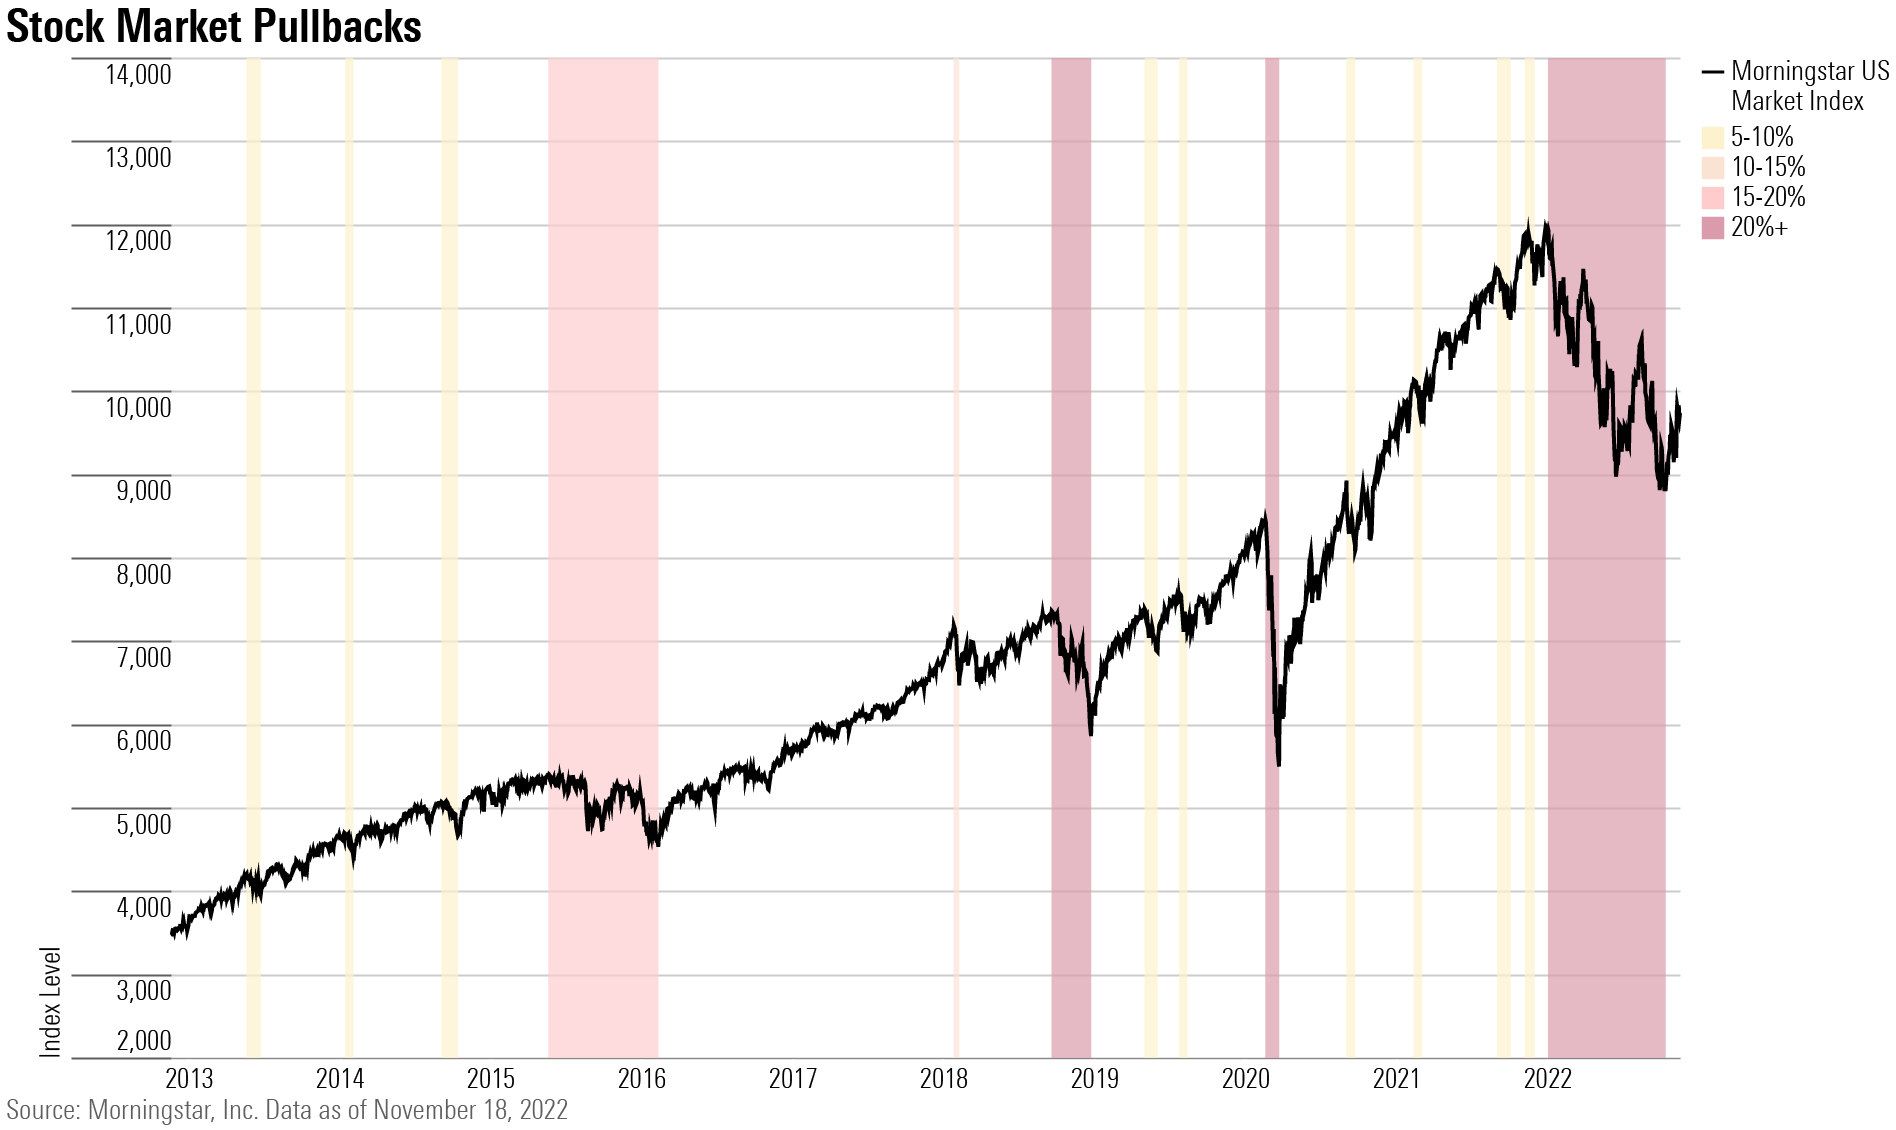 A line chart showing historical stock market pullbacks from their most recent peak in the last 10 years.